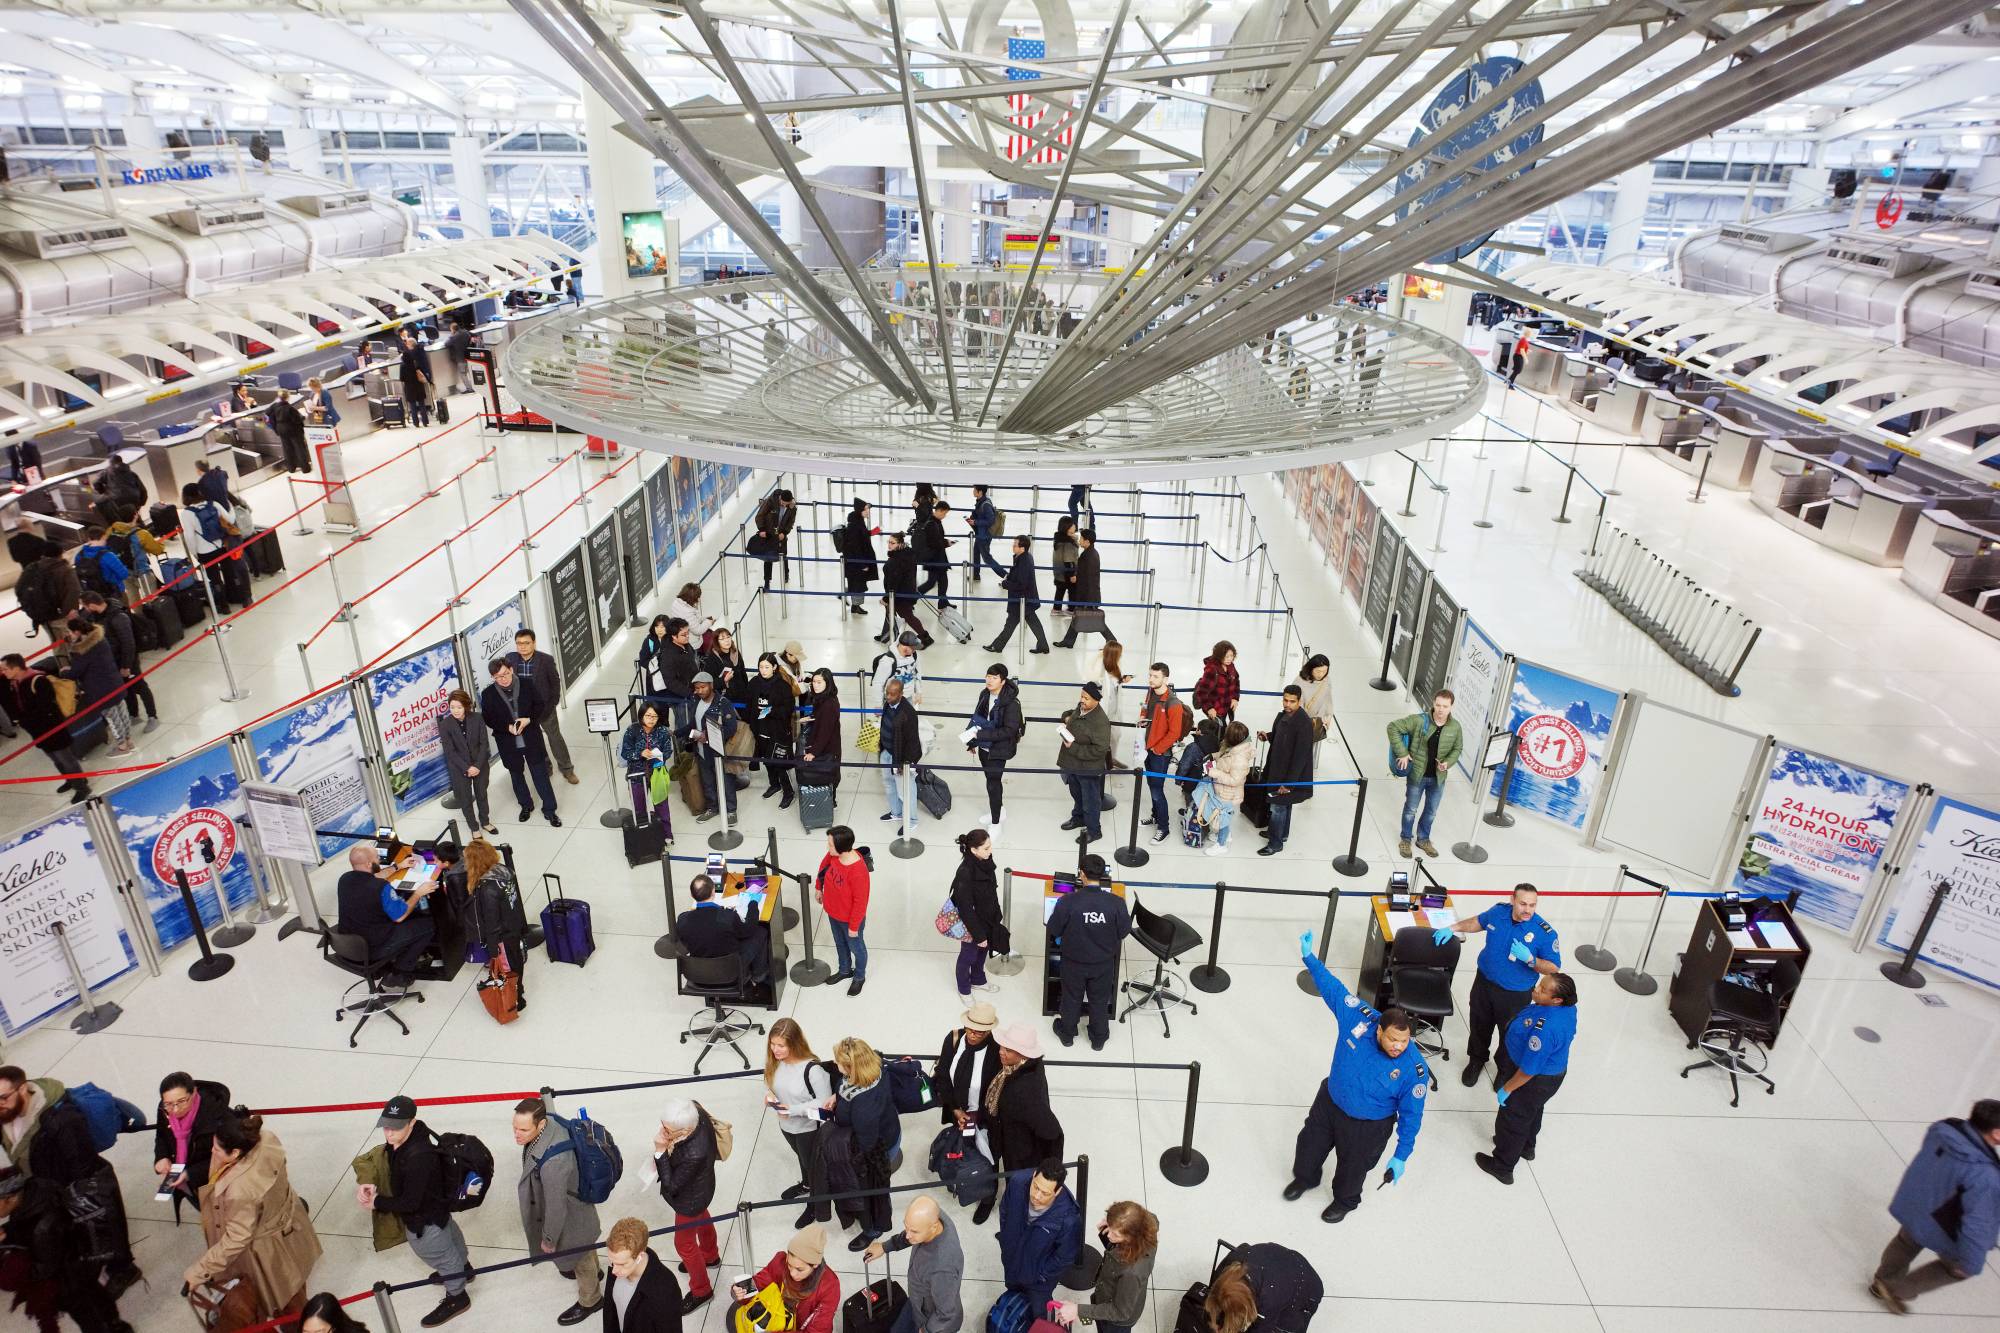 FILE- In this March 2, 2018, file photo, passengers stand in line as they wait to pass through a TSA security checkpoint at JFK International Airport in New York. If time is money, find out whether your credit card will reimburse you the application fee for TSA PreCheck or Global Entry programs. These programs can offer faster clearance through airport screening, and some cards offer application credits of up to $100. (AP Photo/Mark Lennihan, File)